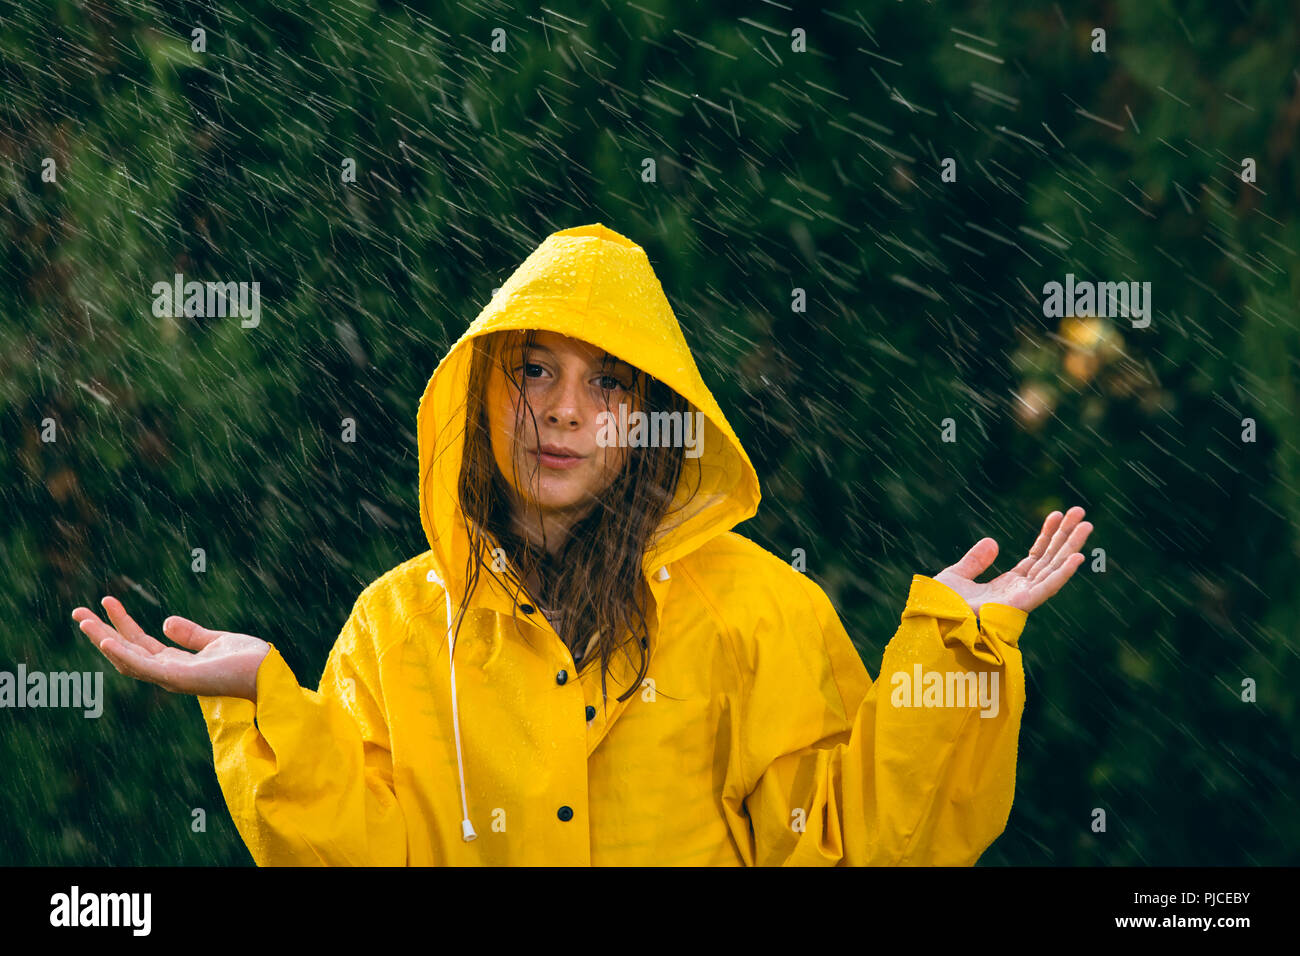 little girl out in the rain with yellow raincoat Stock Photo